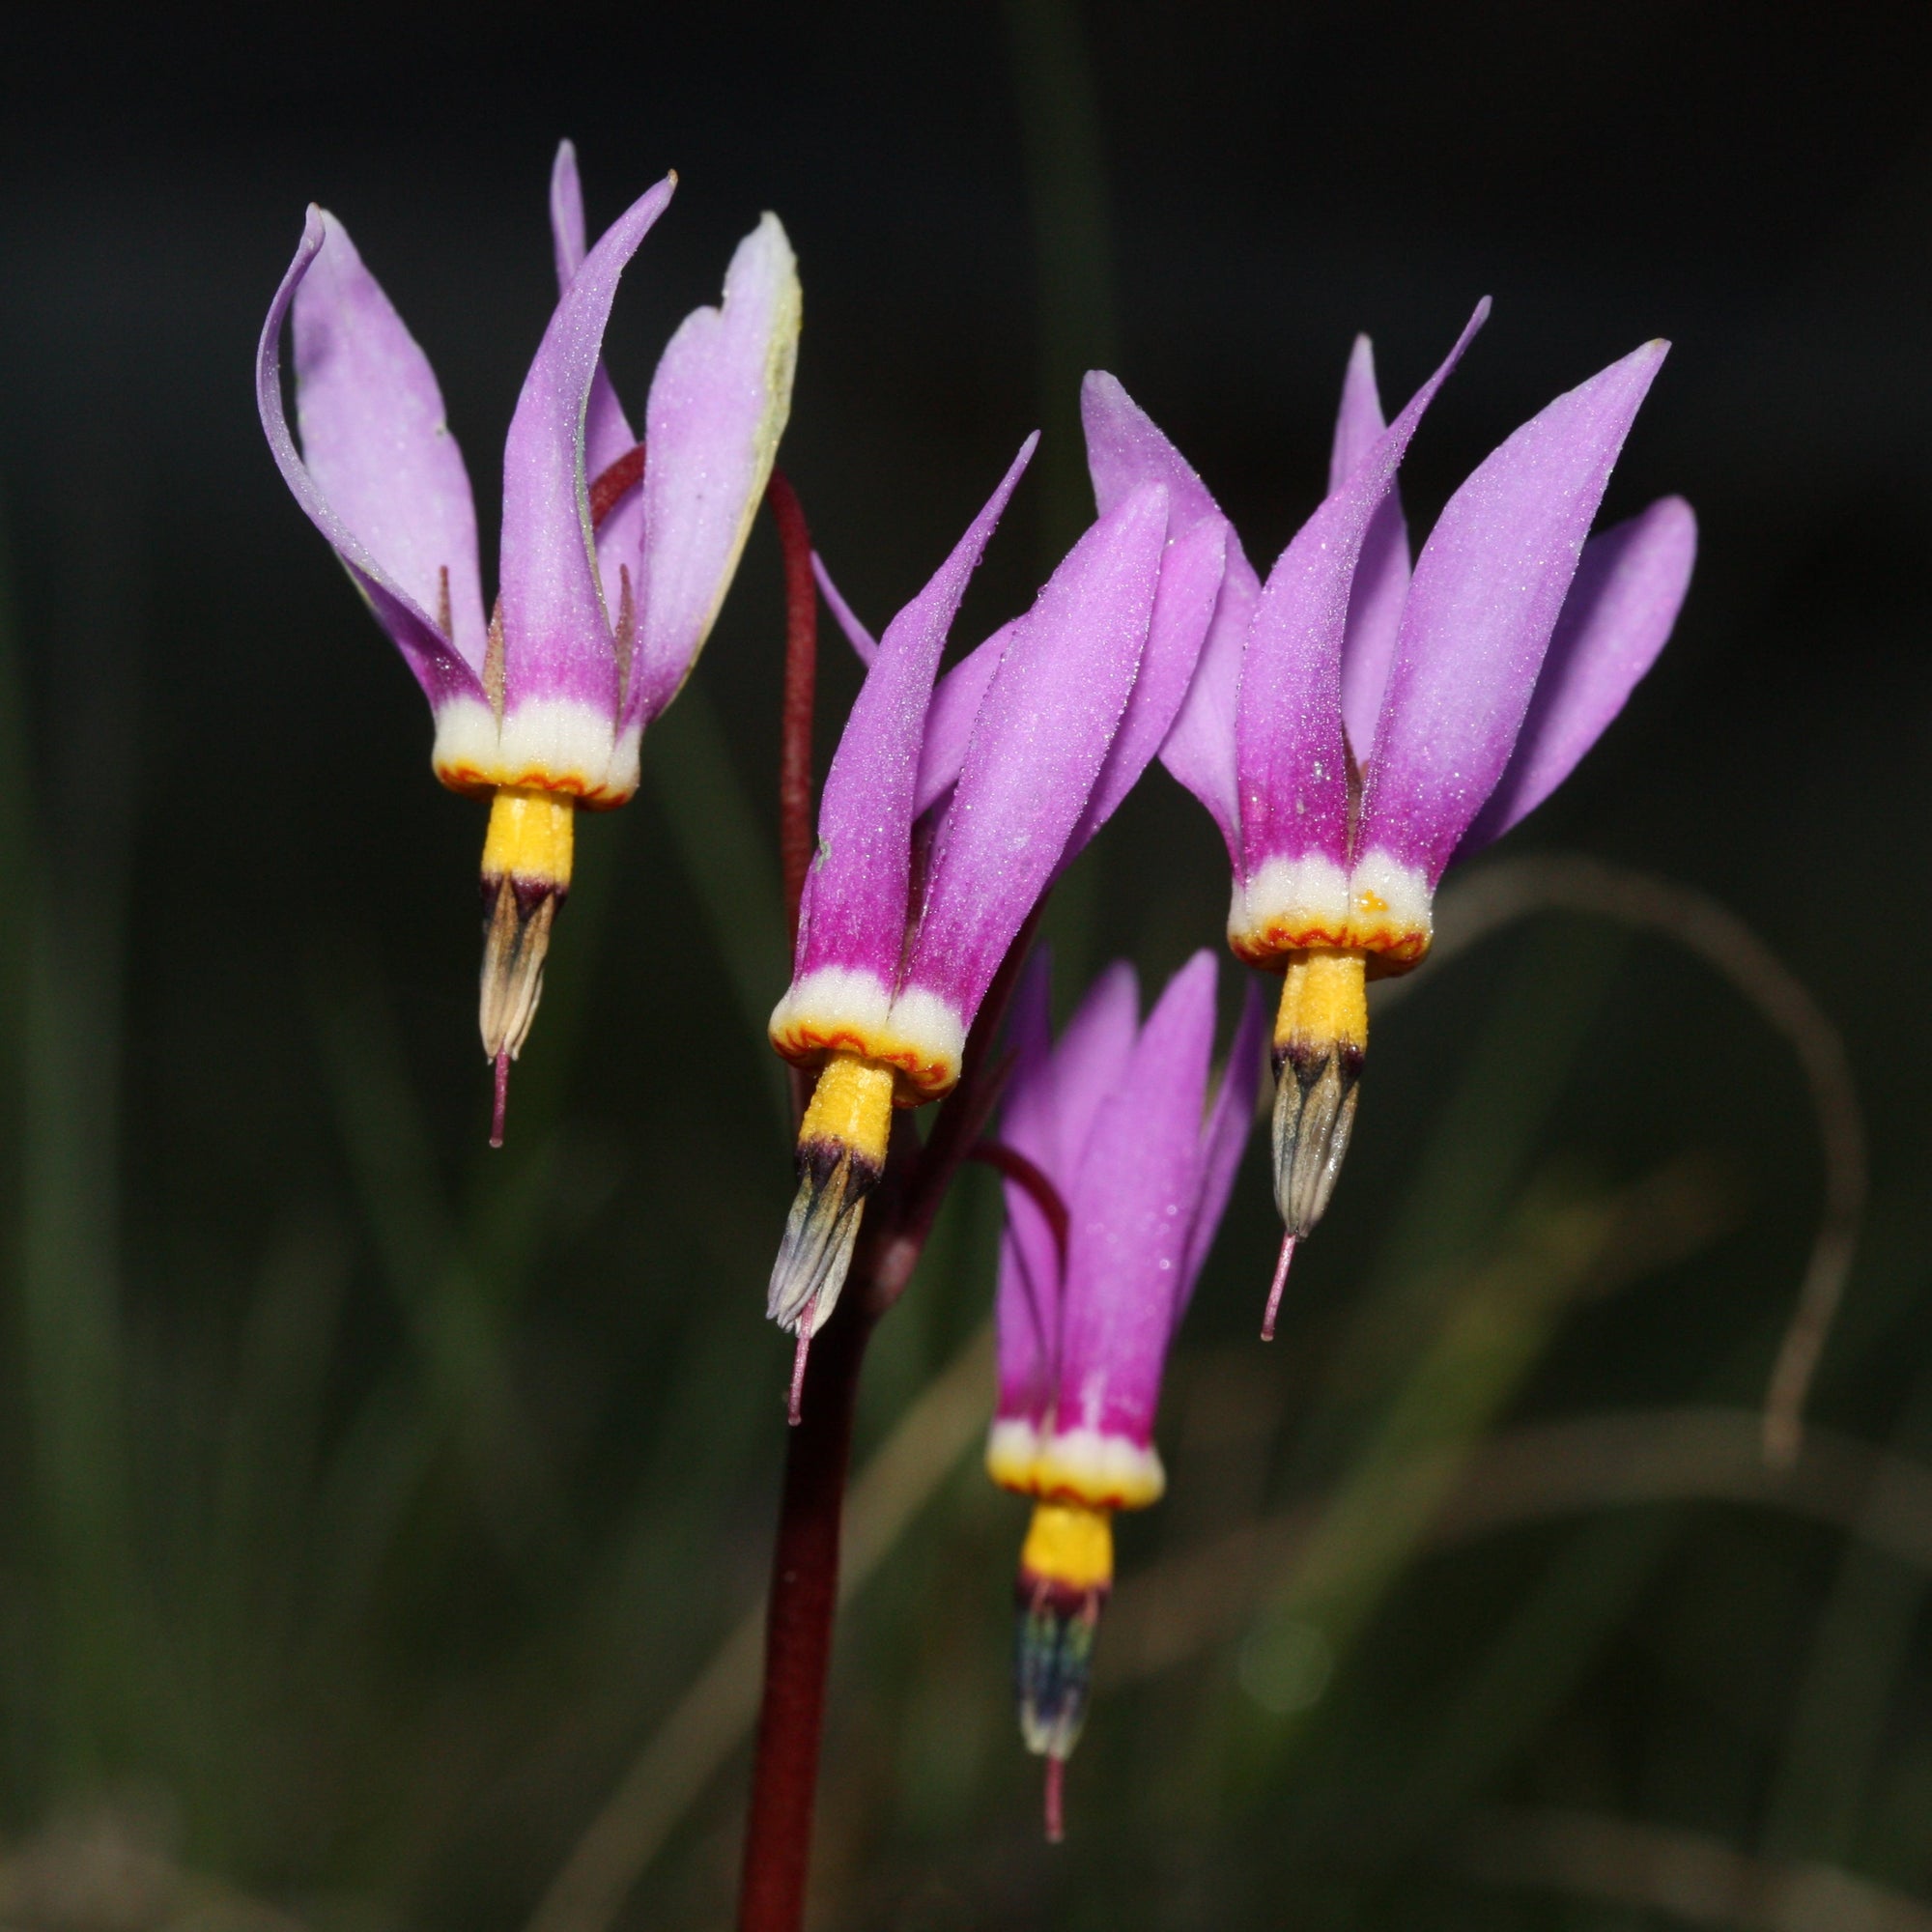 Long and vibrant pink petals can be seen standing straight up on 4 downward growing flowers. They have a white and yellow tip with stamens protruding. The stem of the flower is red.